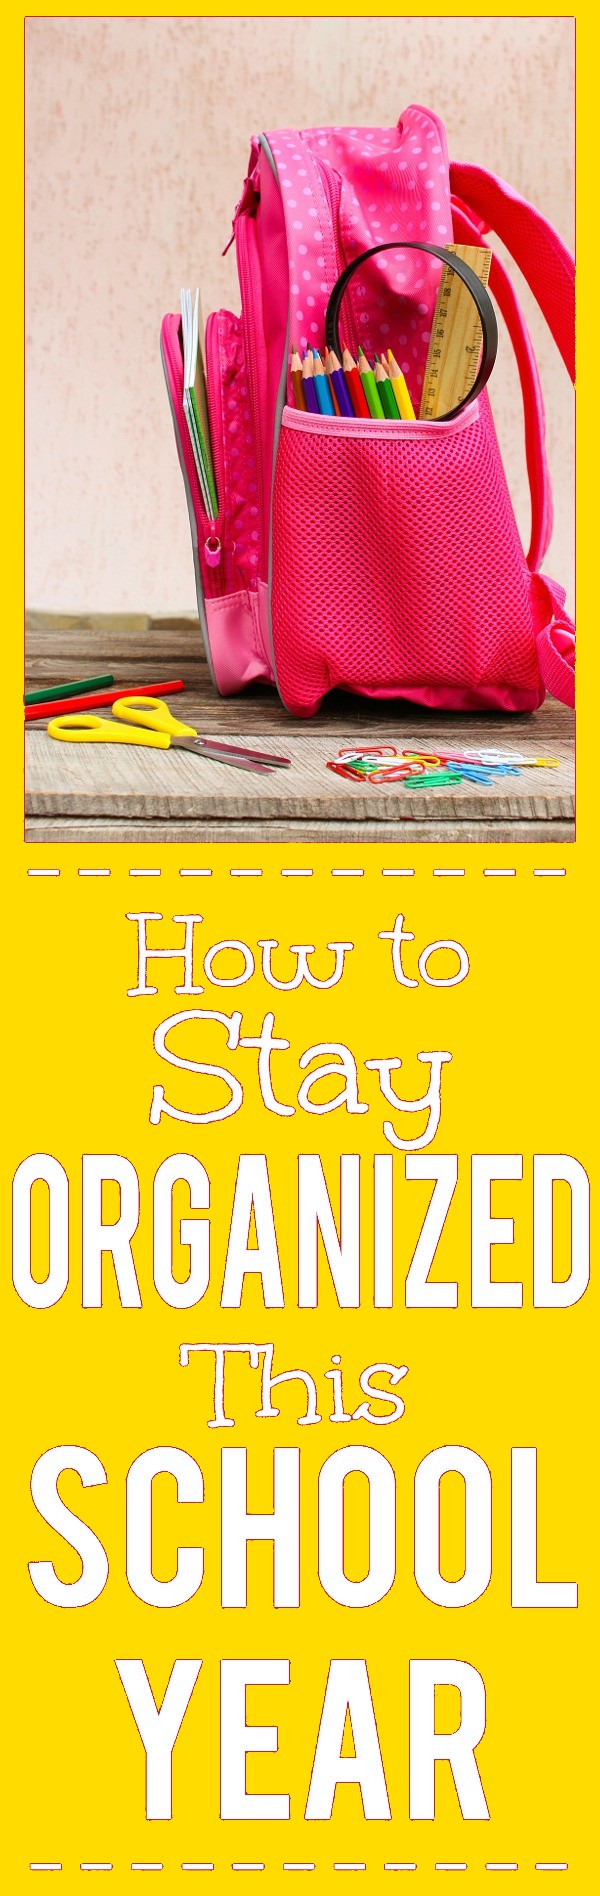 How to Get and Keep Your Kids Organized this School Year - 6 Easy Tips! Jump into the school year the right way by getting and staying organized with these 6 tips for how to keep your kids organized this school year for a happier, healthier year! Just what we needed!